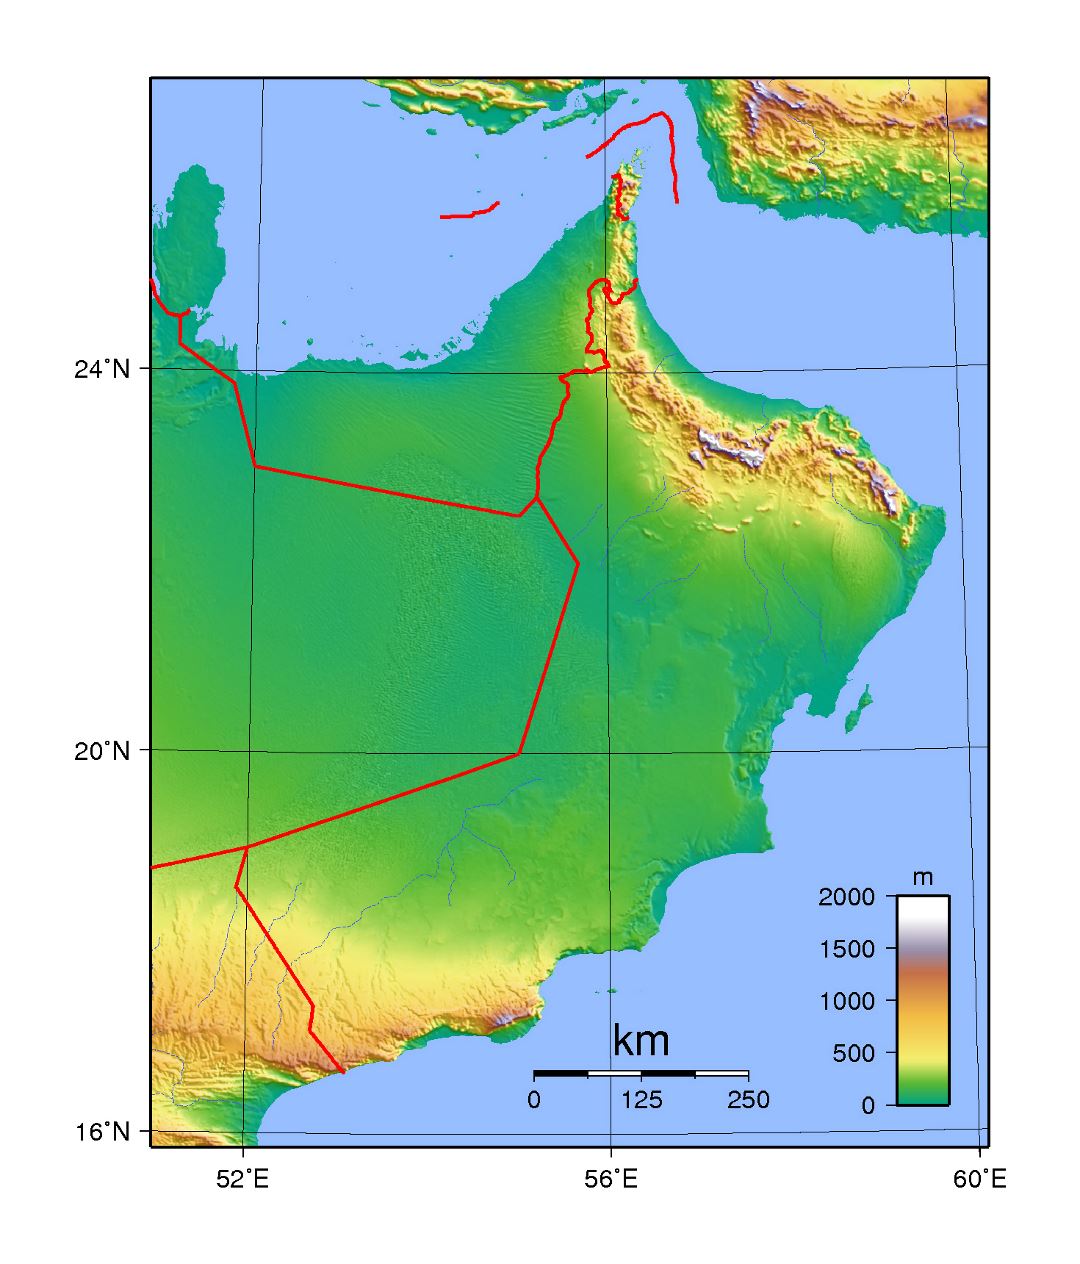 Large topographical map of Oman